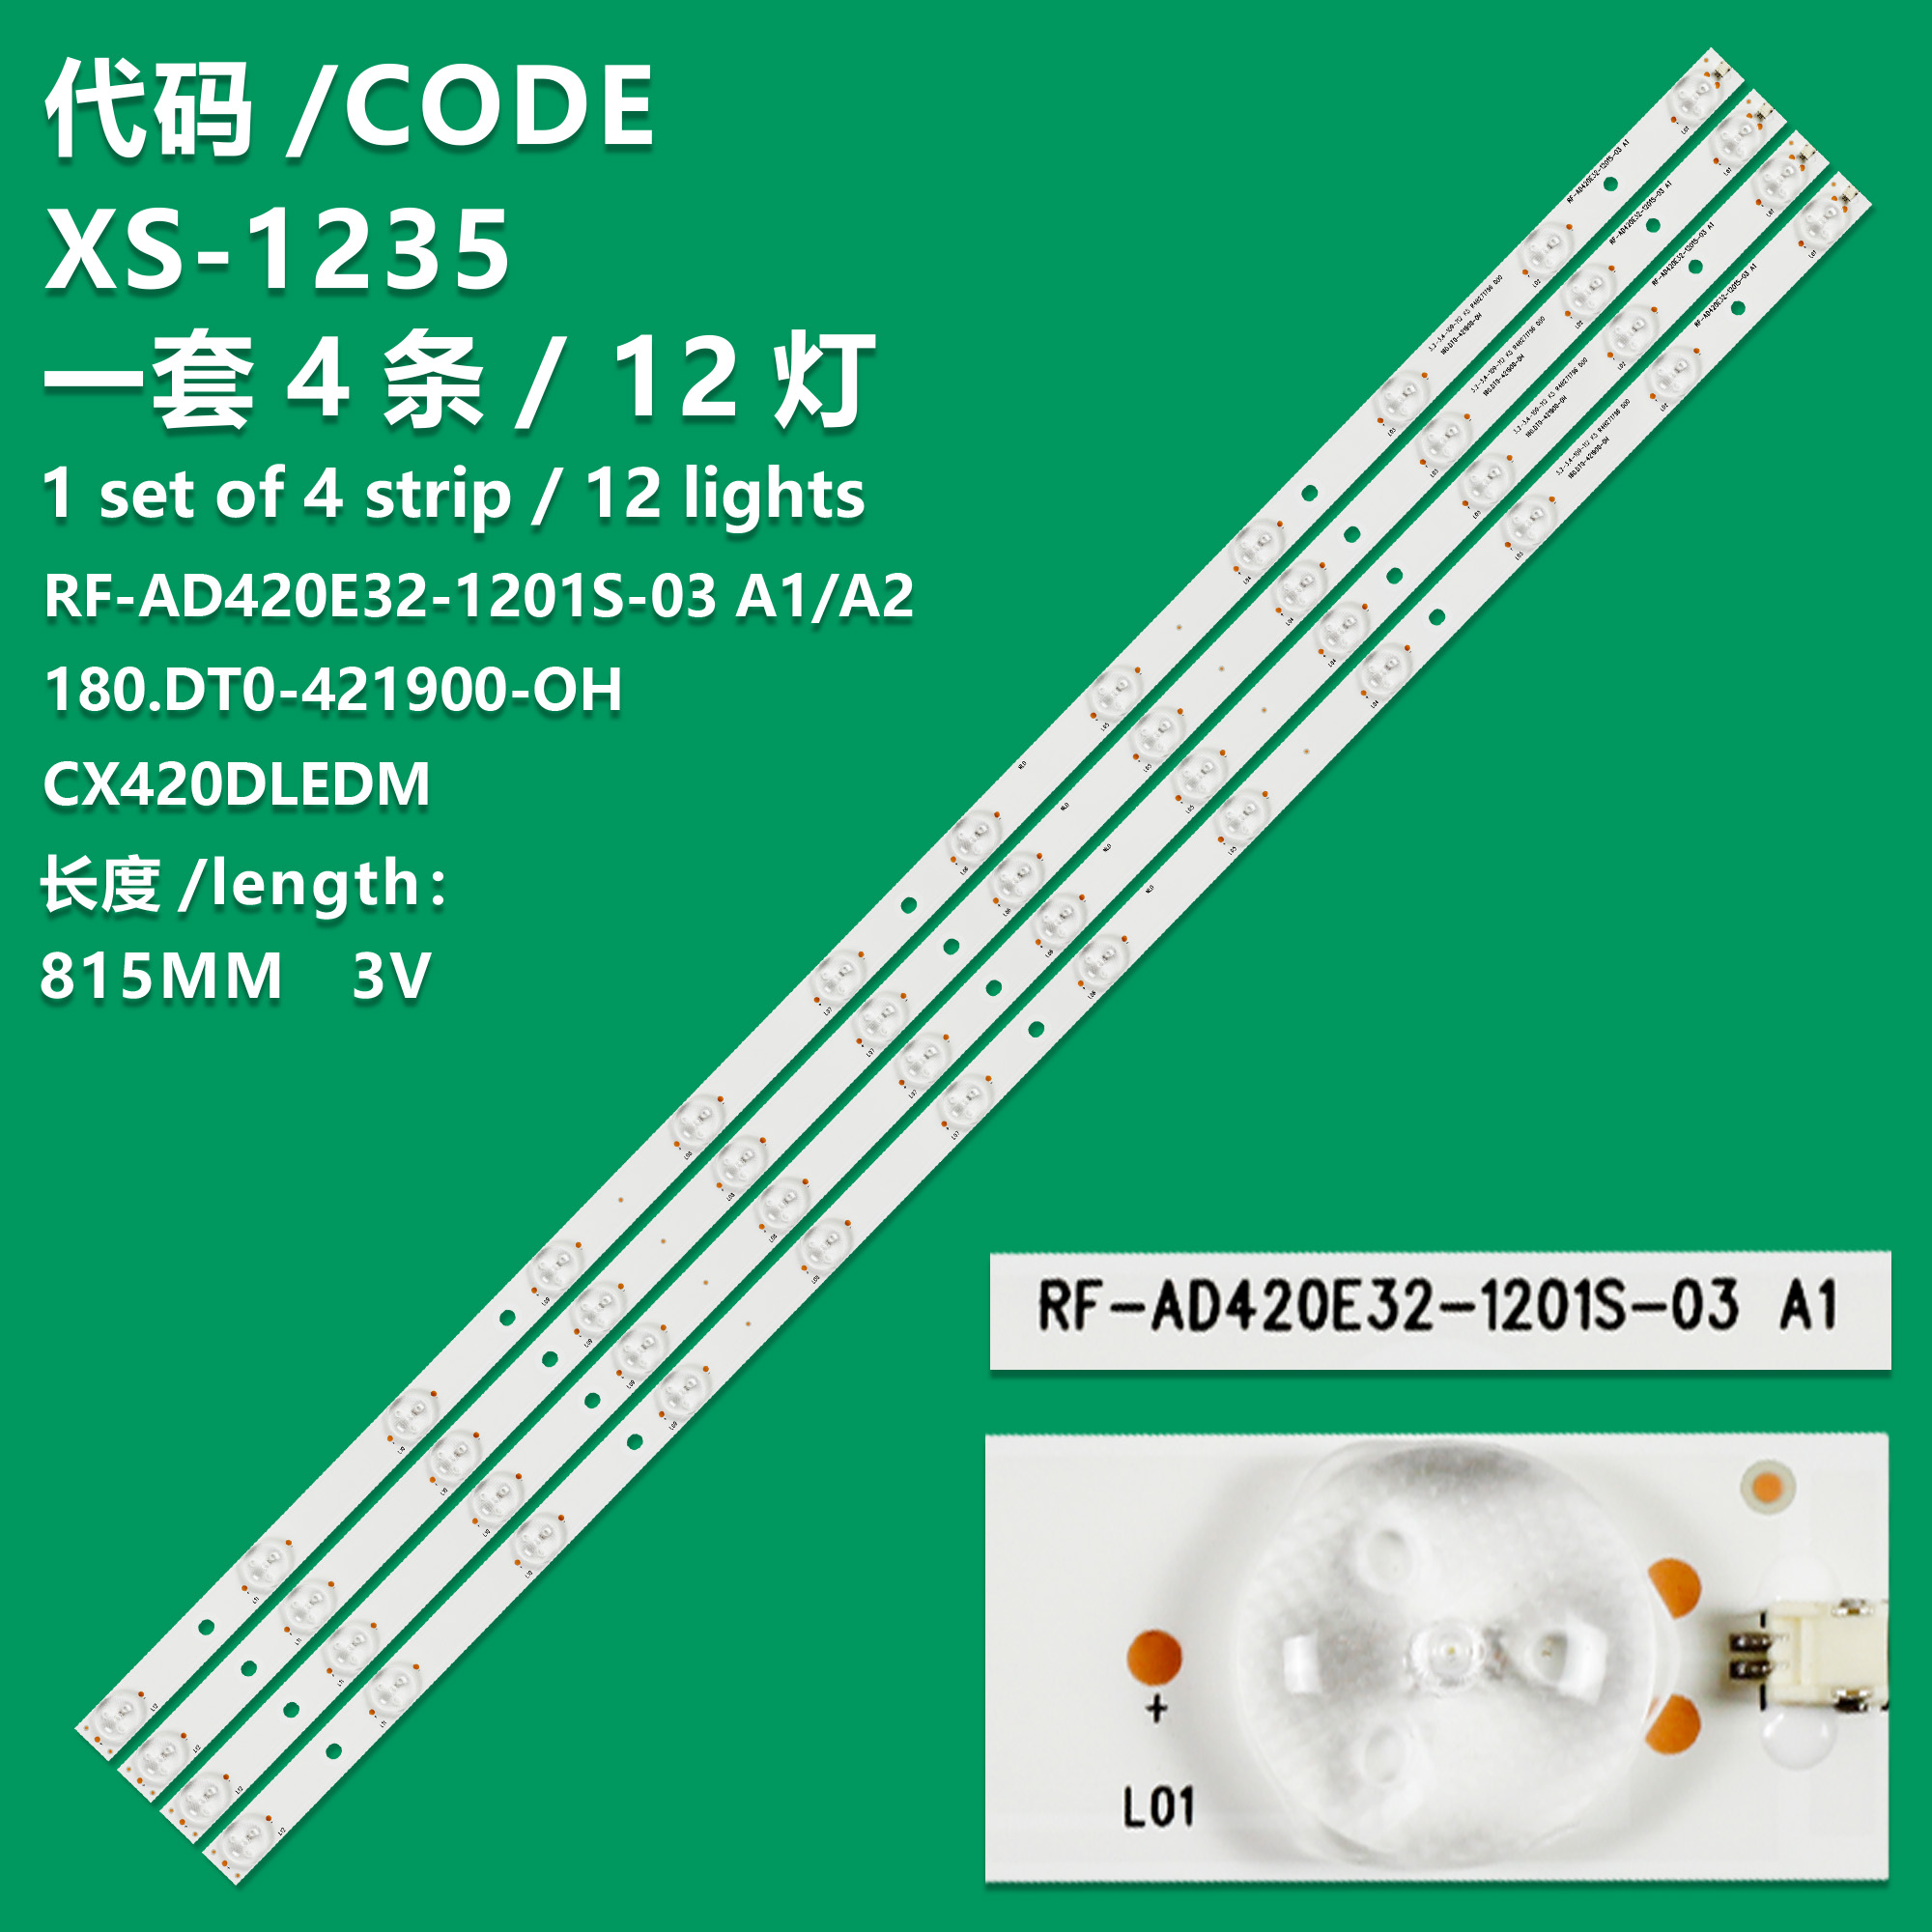 XS-1235 New LCD TV Backlight Strip RF-AD420E32-1201S-03 A1/CX420DLEDM Suitable For Sanyo LE106S16FM Color News LE-4219